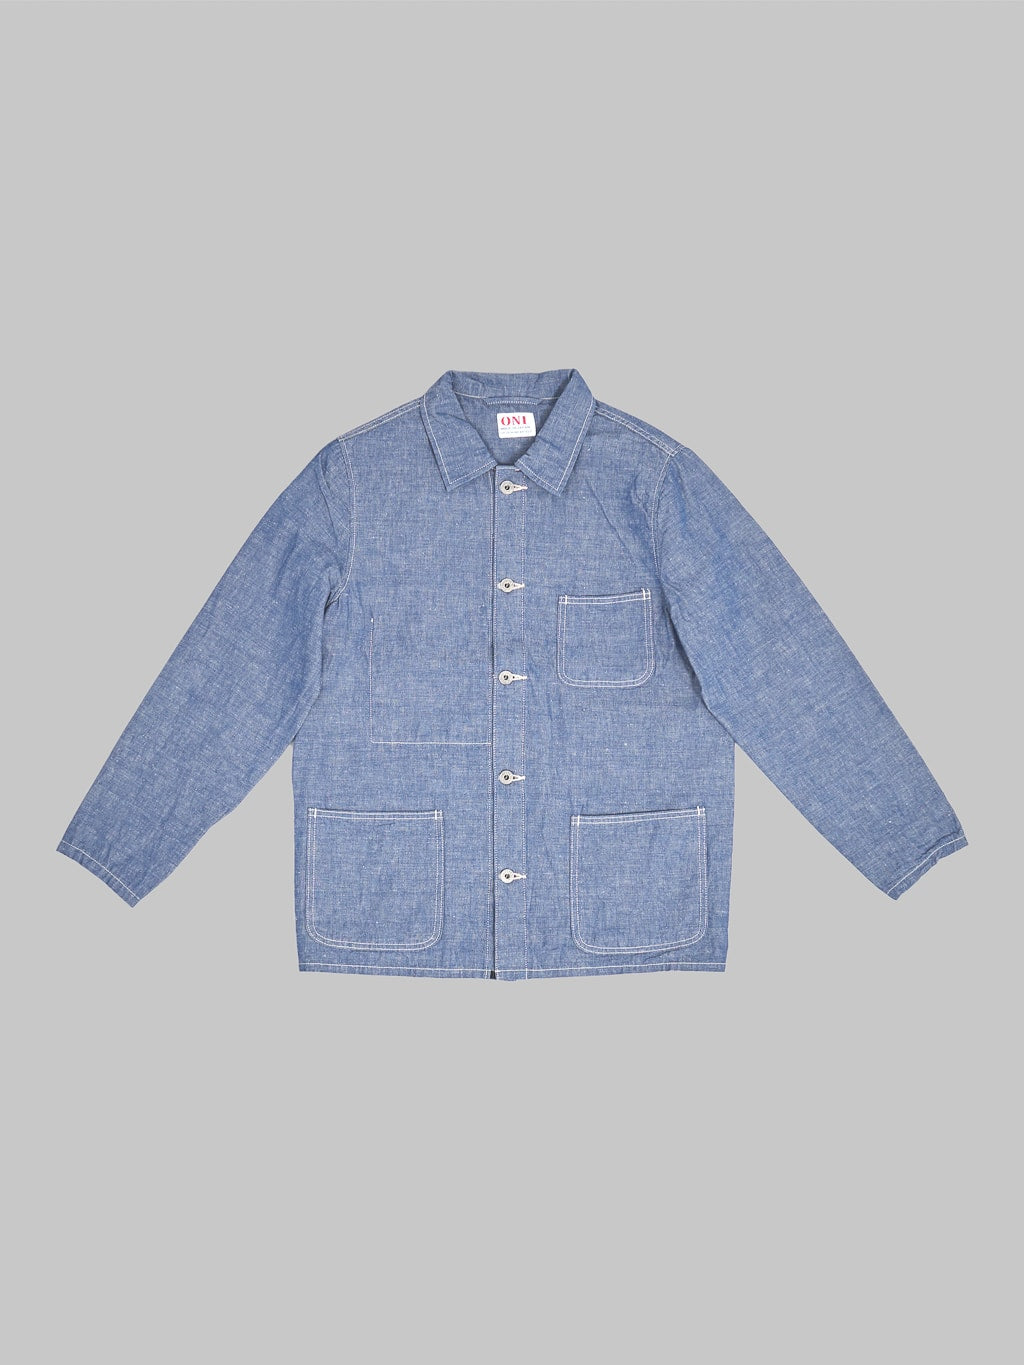 Oni denim heavy chambray blue gray coverall front view